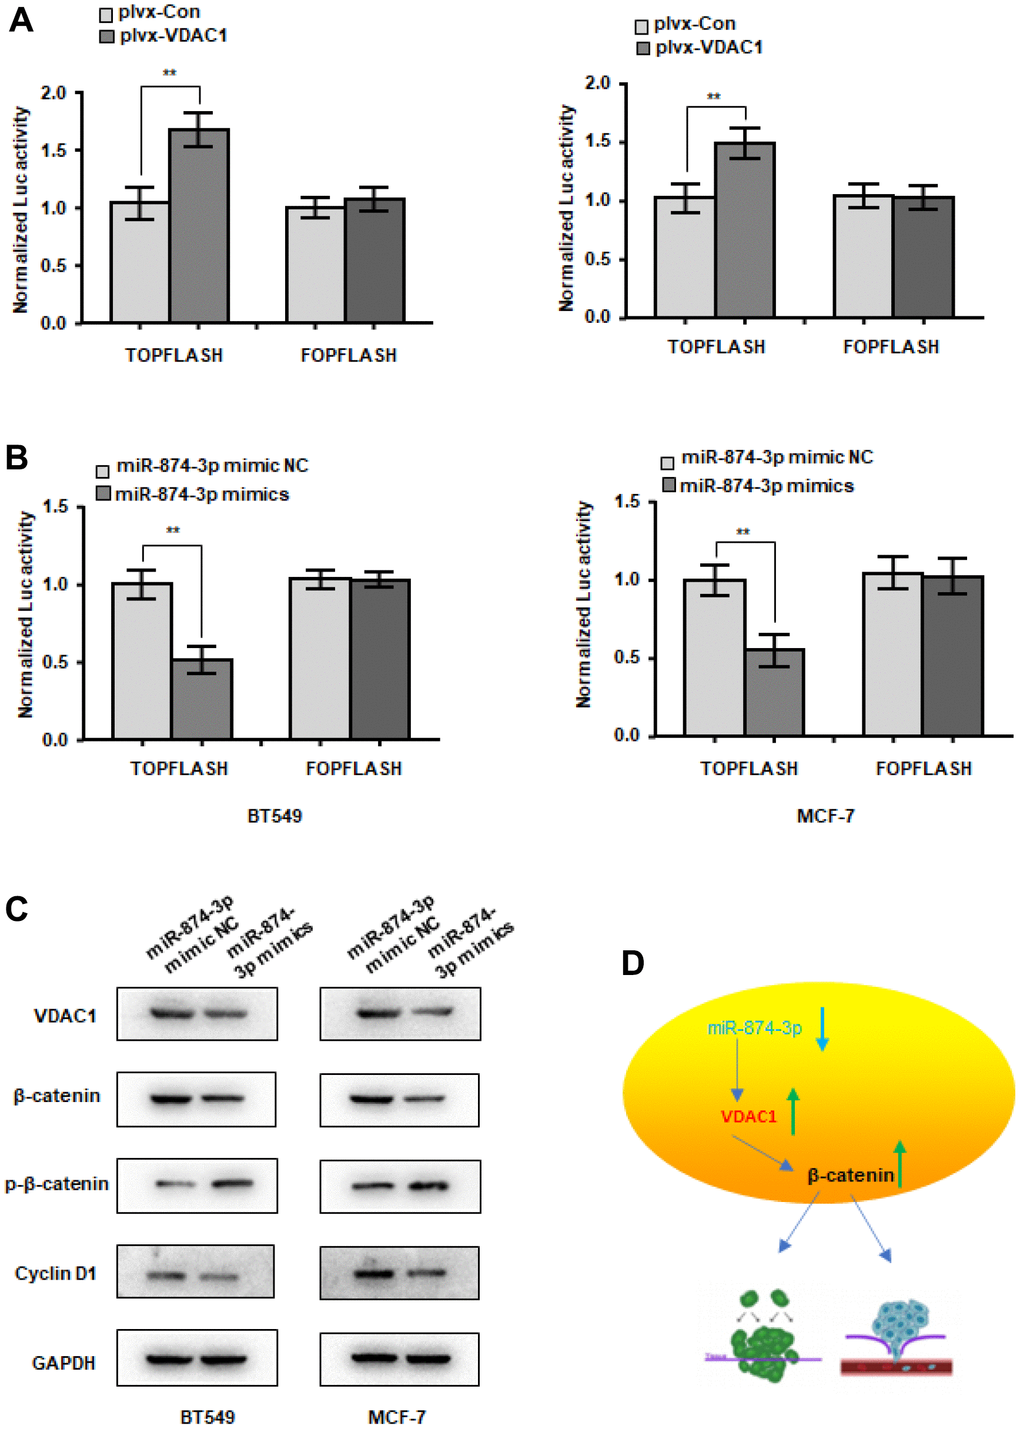 miR-874-3p-VDAC1 axis regulates Wnt/β-catenin signaling in breast cancer cells. (A) β-catenin reporter assay in MCF-7 and BT549 cells with VDAC1 overexpression (A) or miR-874-3p overexpression (B). (C) Effects of miR-874-3p on protein levels of total β-catenin, phosphorylated β-catenin (Ser33/37/Thr41) and cyclin D1. (D) Schematic of the mechanism. The data are presented as the mean ± S.D. *P 